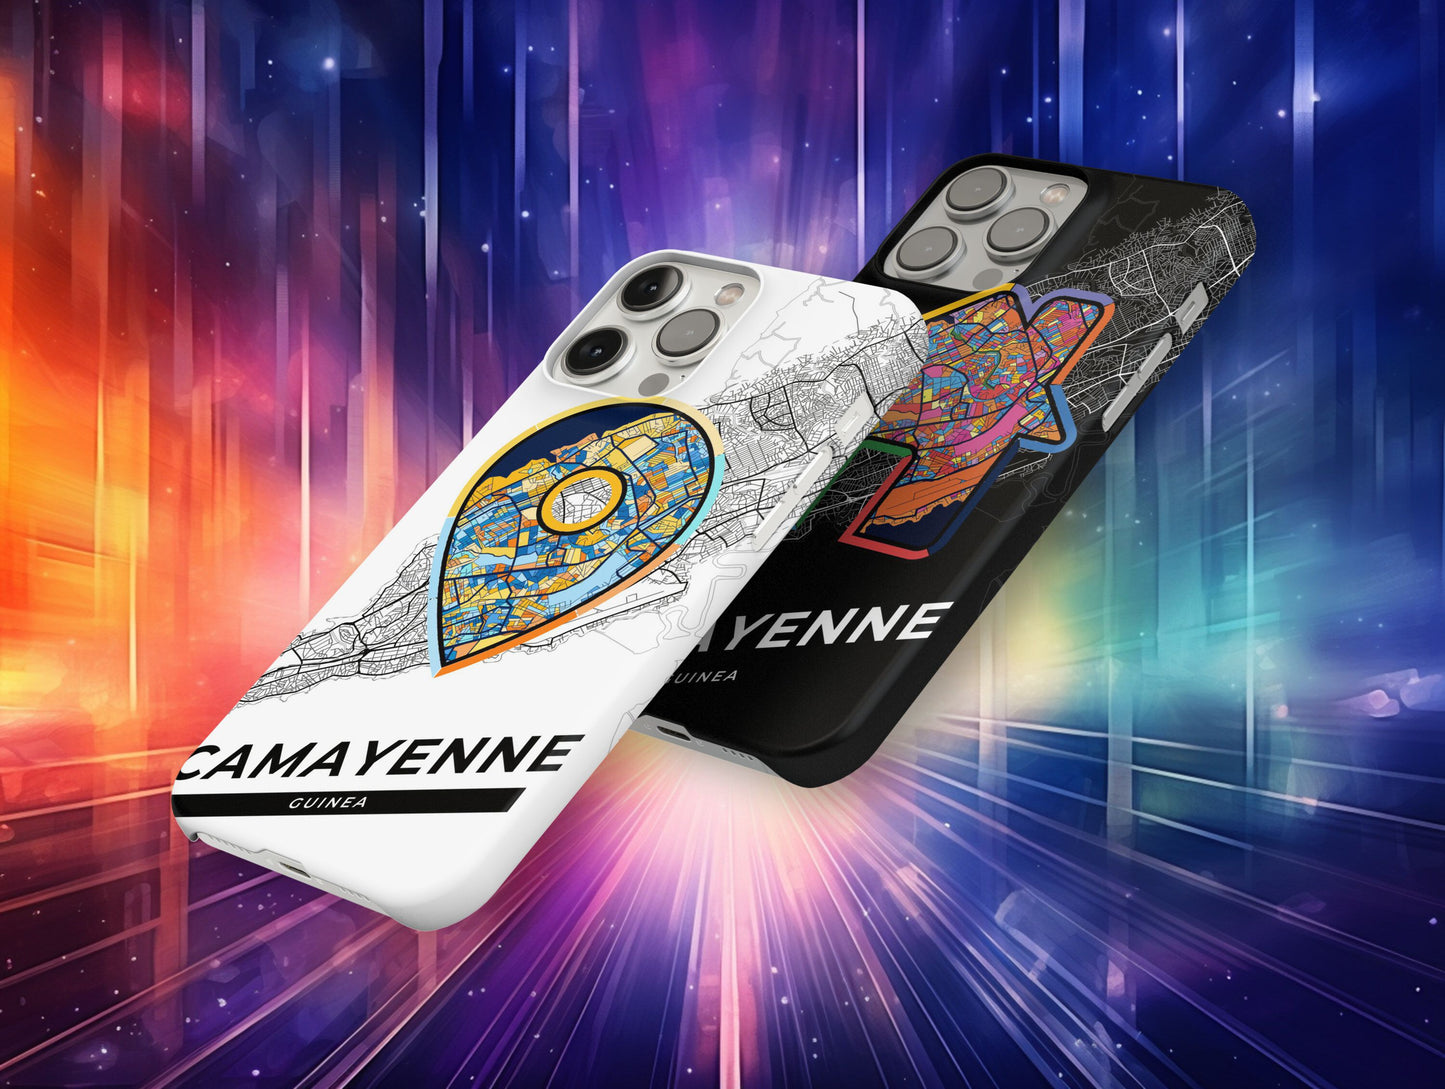 Camayenne Guinea slim phone case with colorful icon. Birthday, wedding or housewarming gift. Couple match cases.